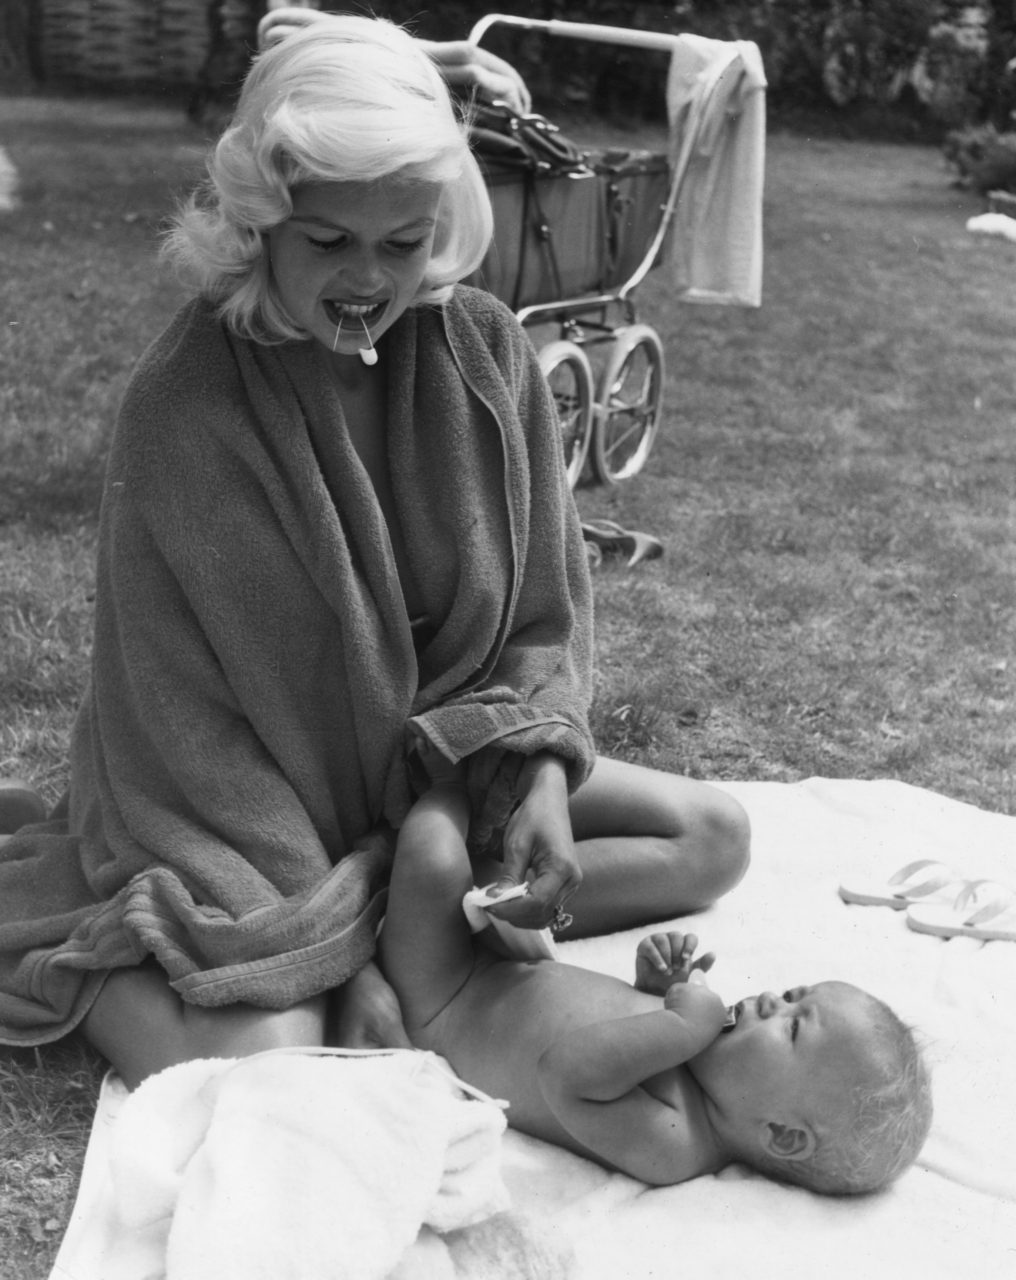 Jayne Mansfield diaper (Chris Ware/Keystone Features/Getty Images)